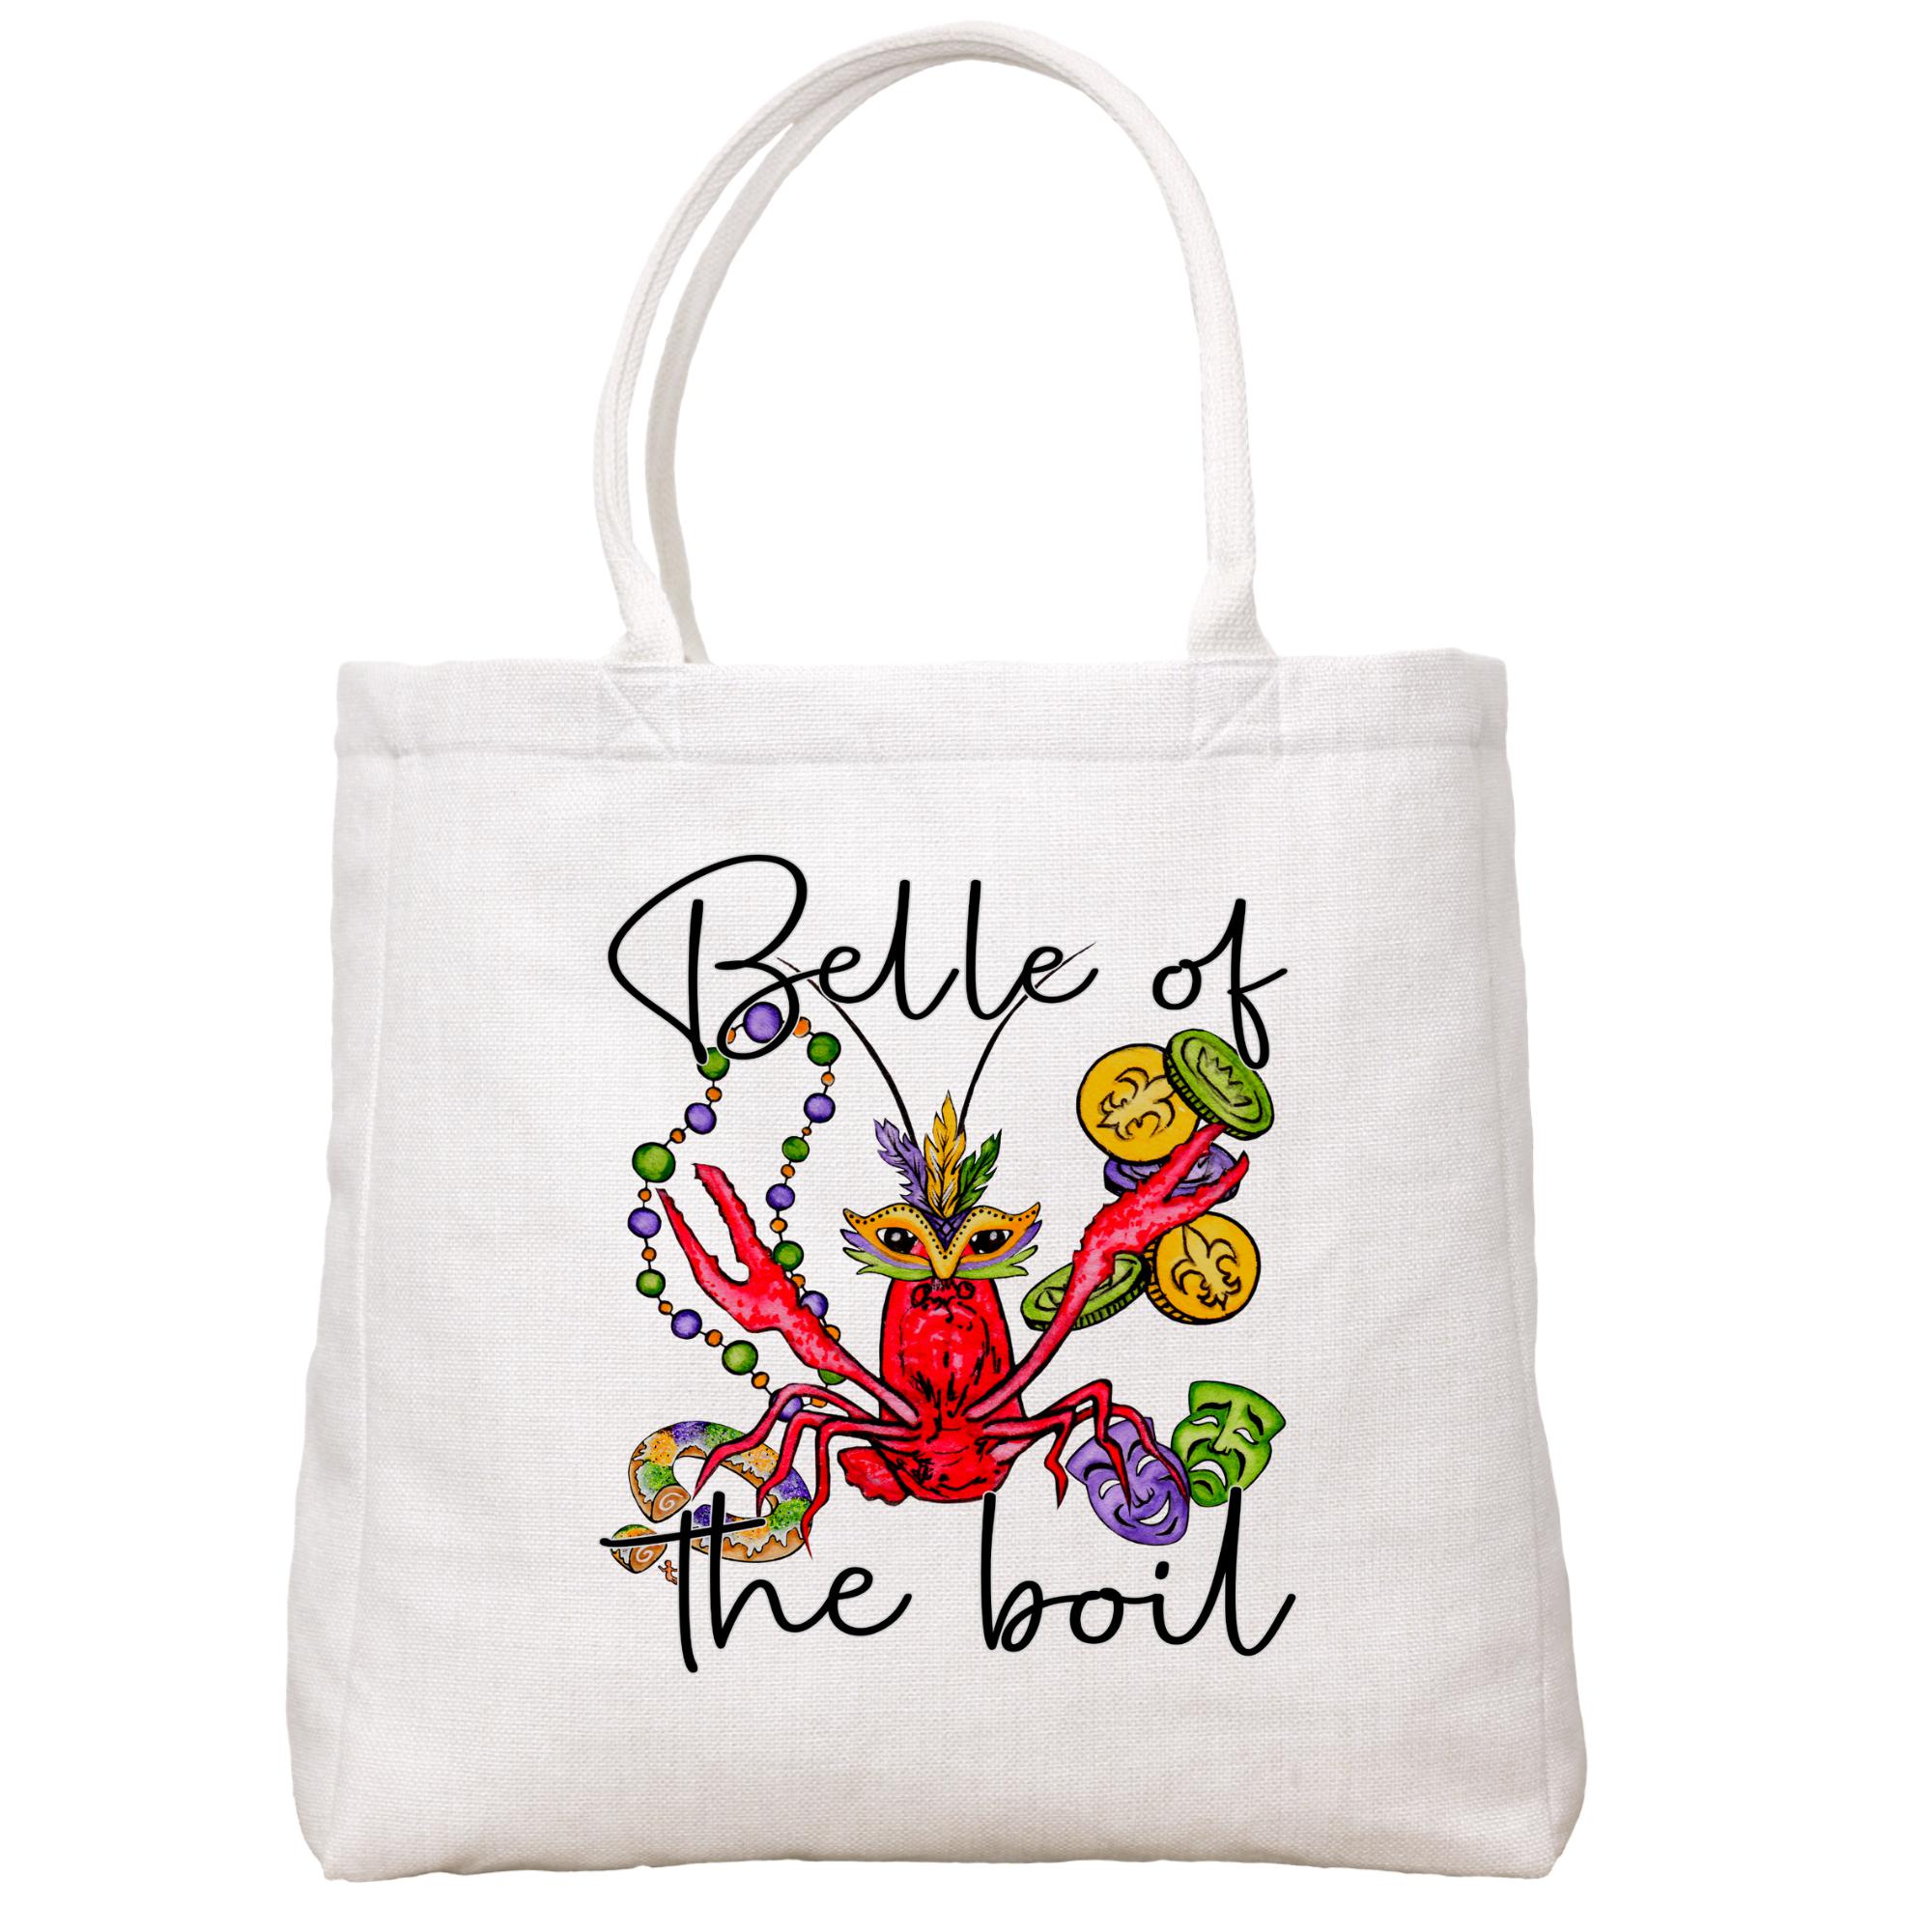 Belle of the Boil Tote Bag Tote Bag - Southern Sisters